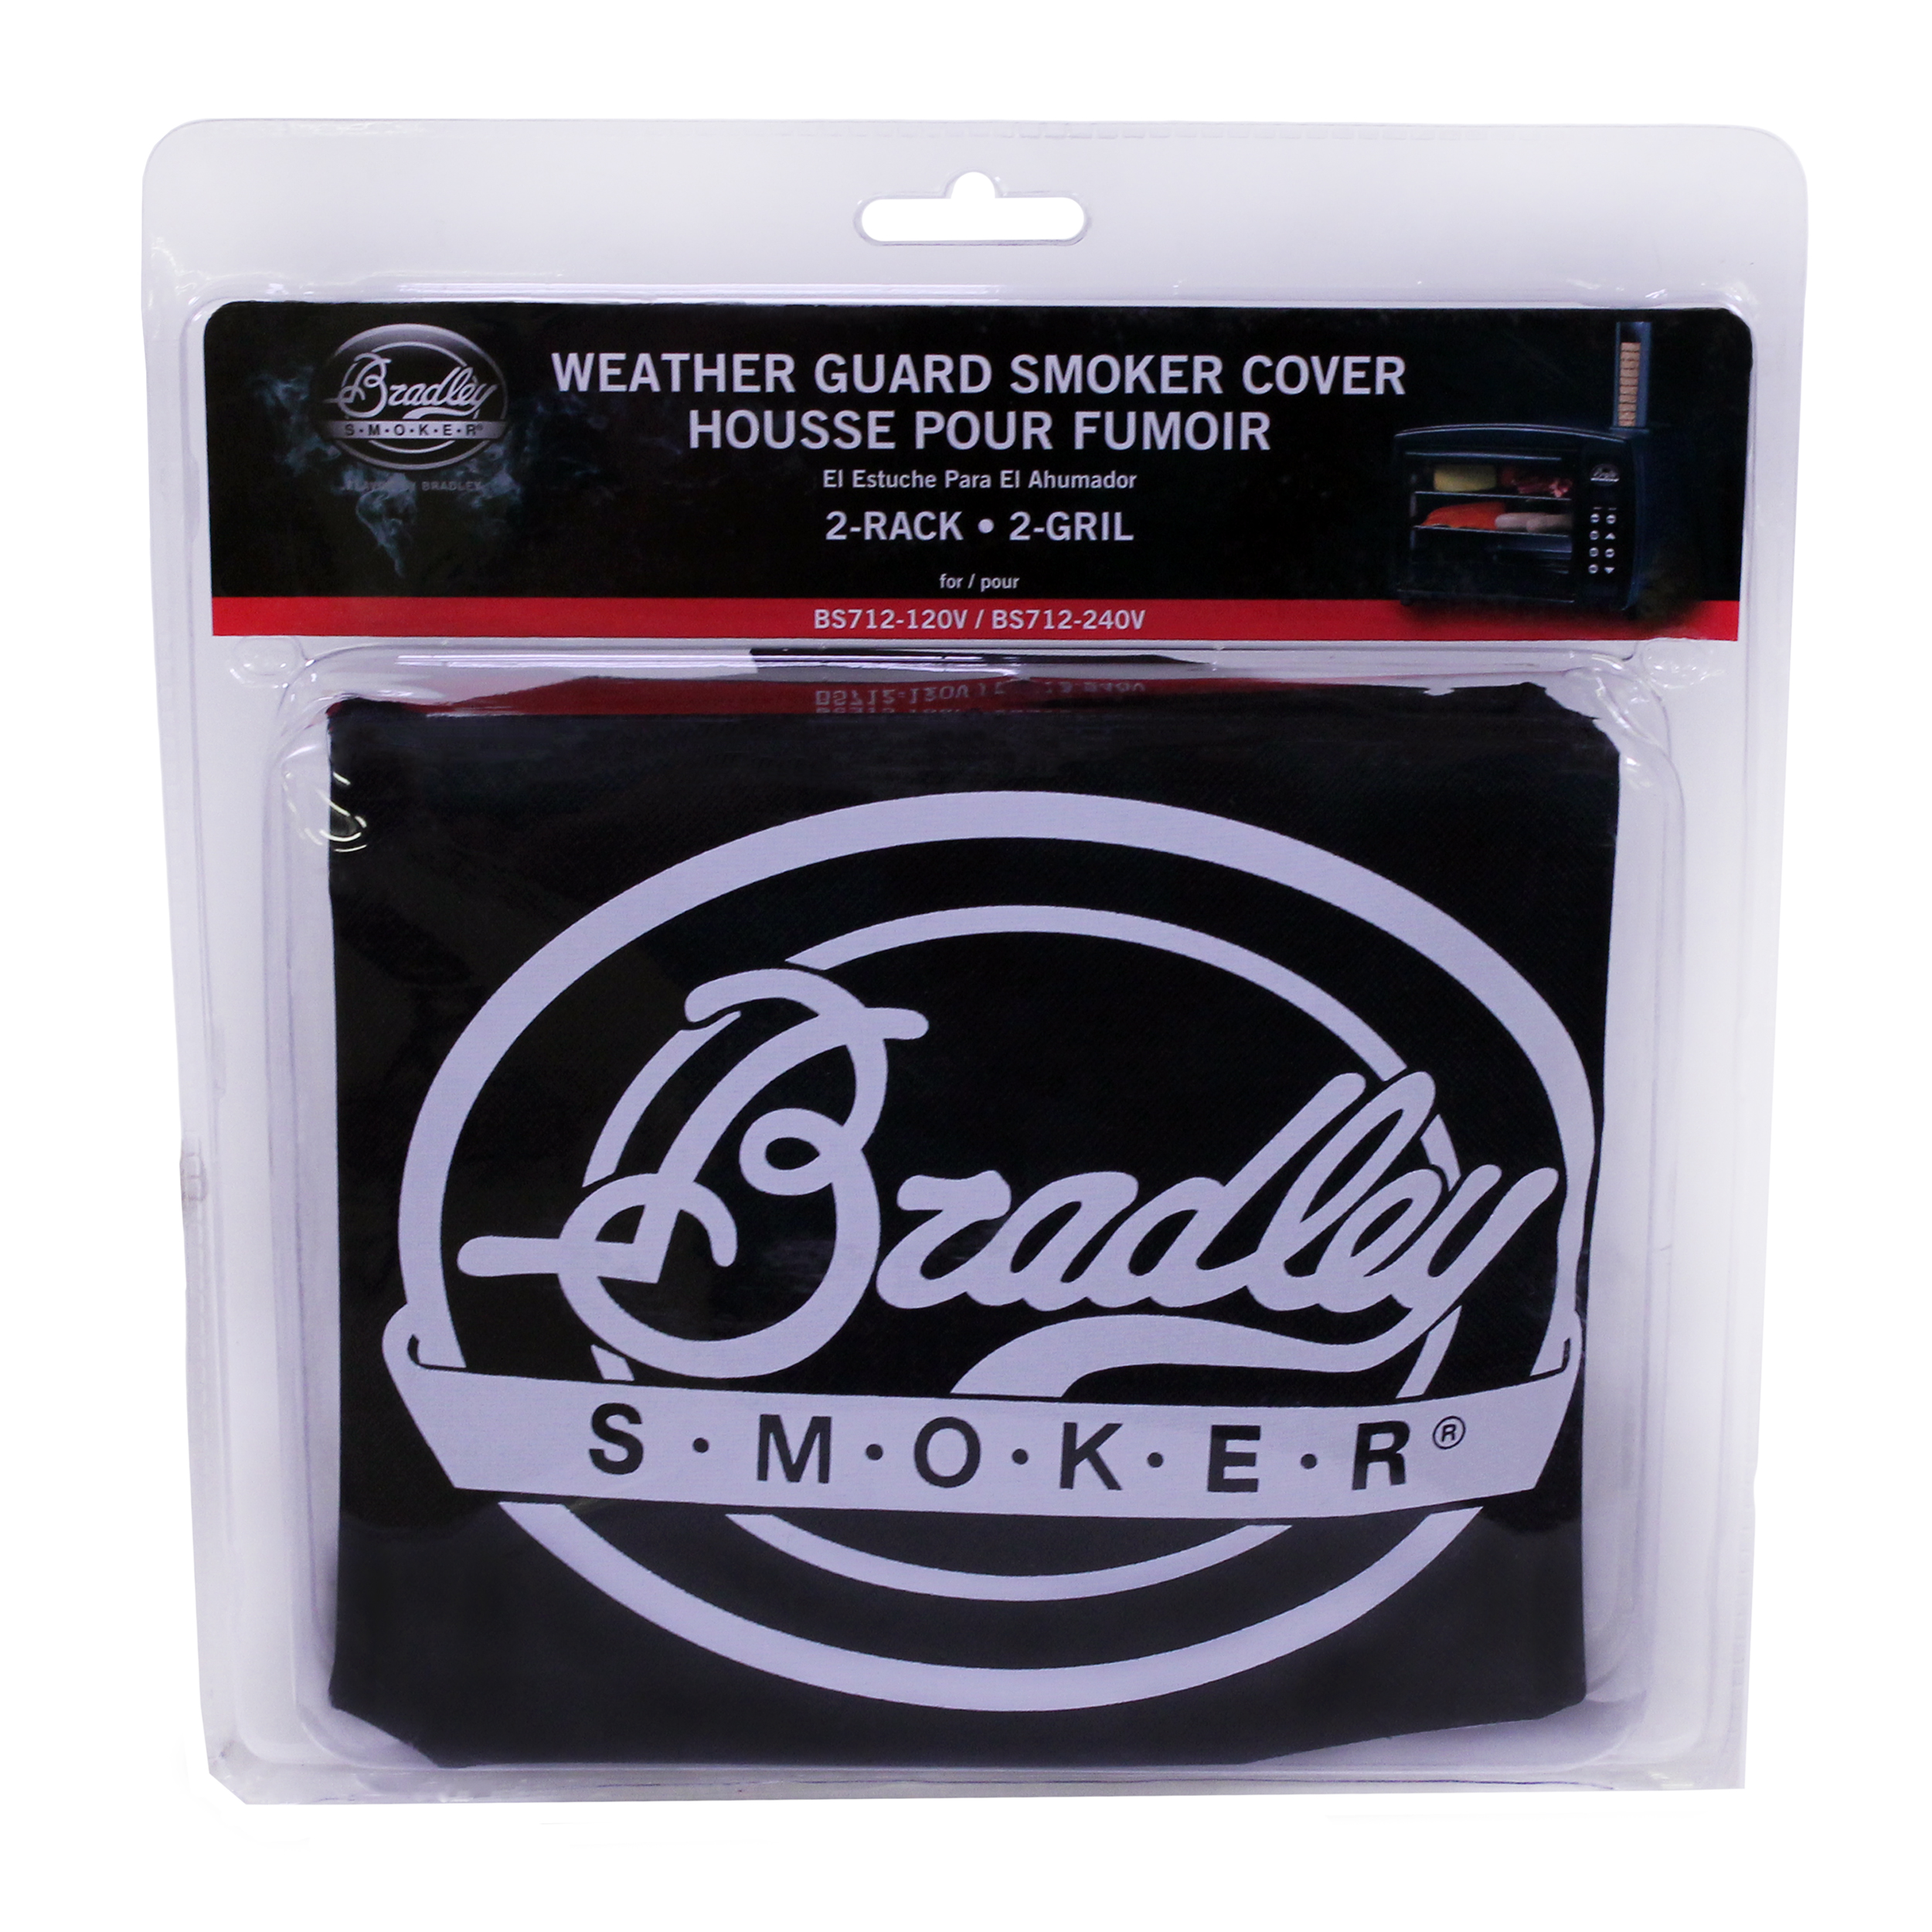 Bradley Technologies Smoker Weather Resistant Cover - image 2 of 2